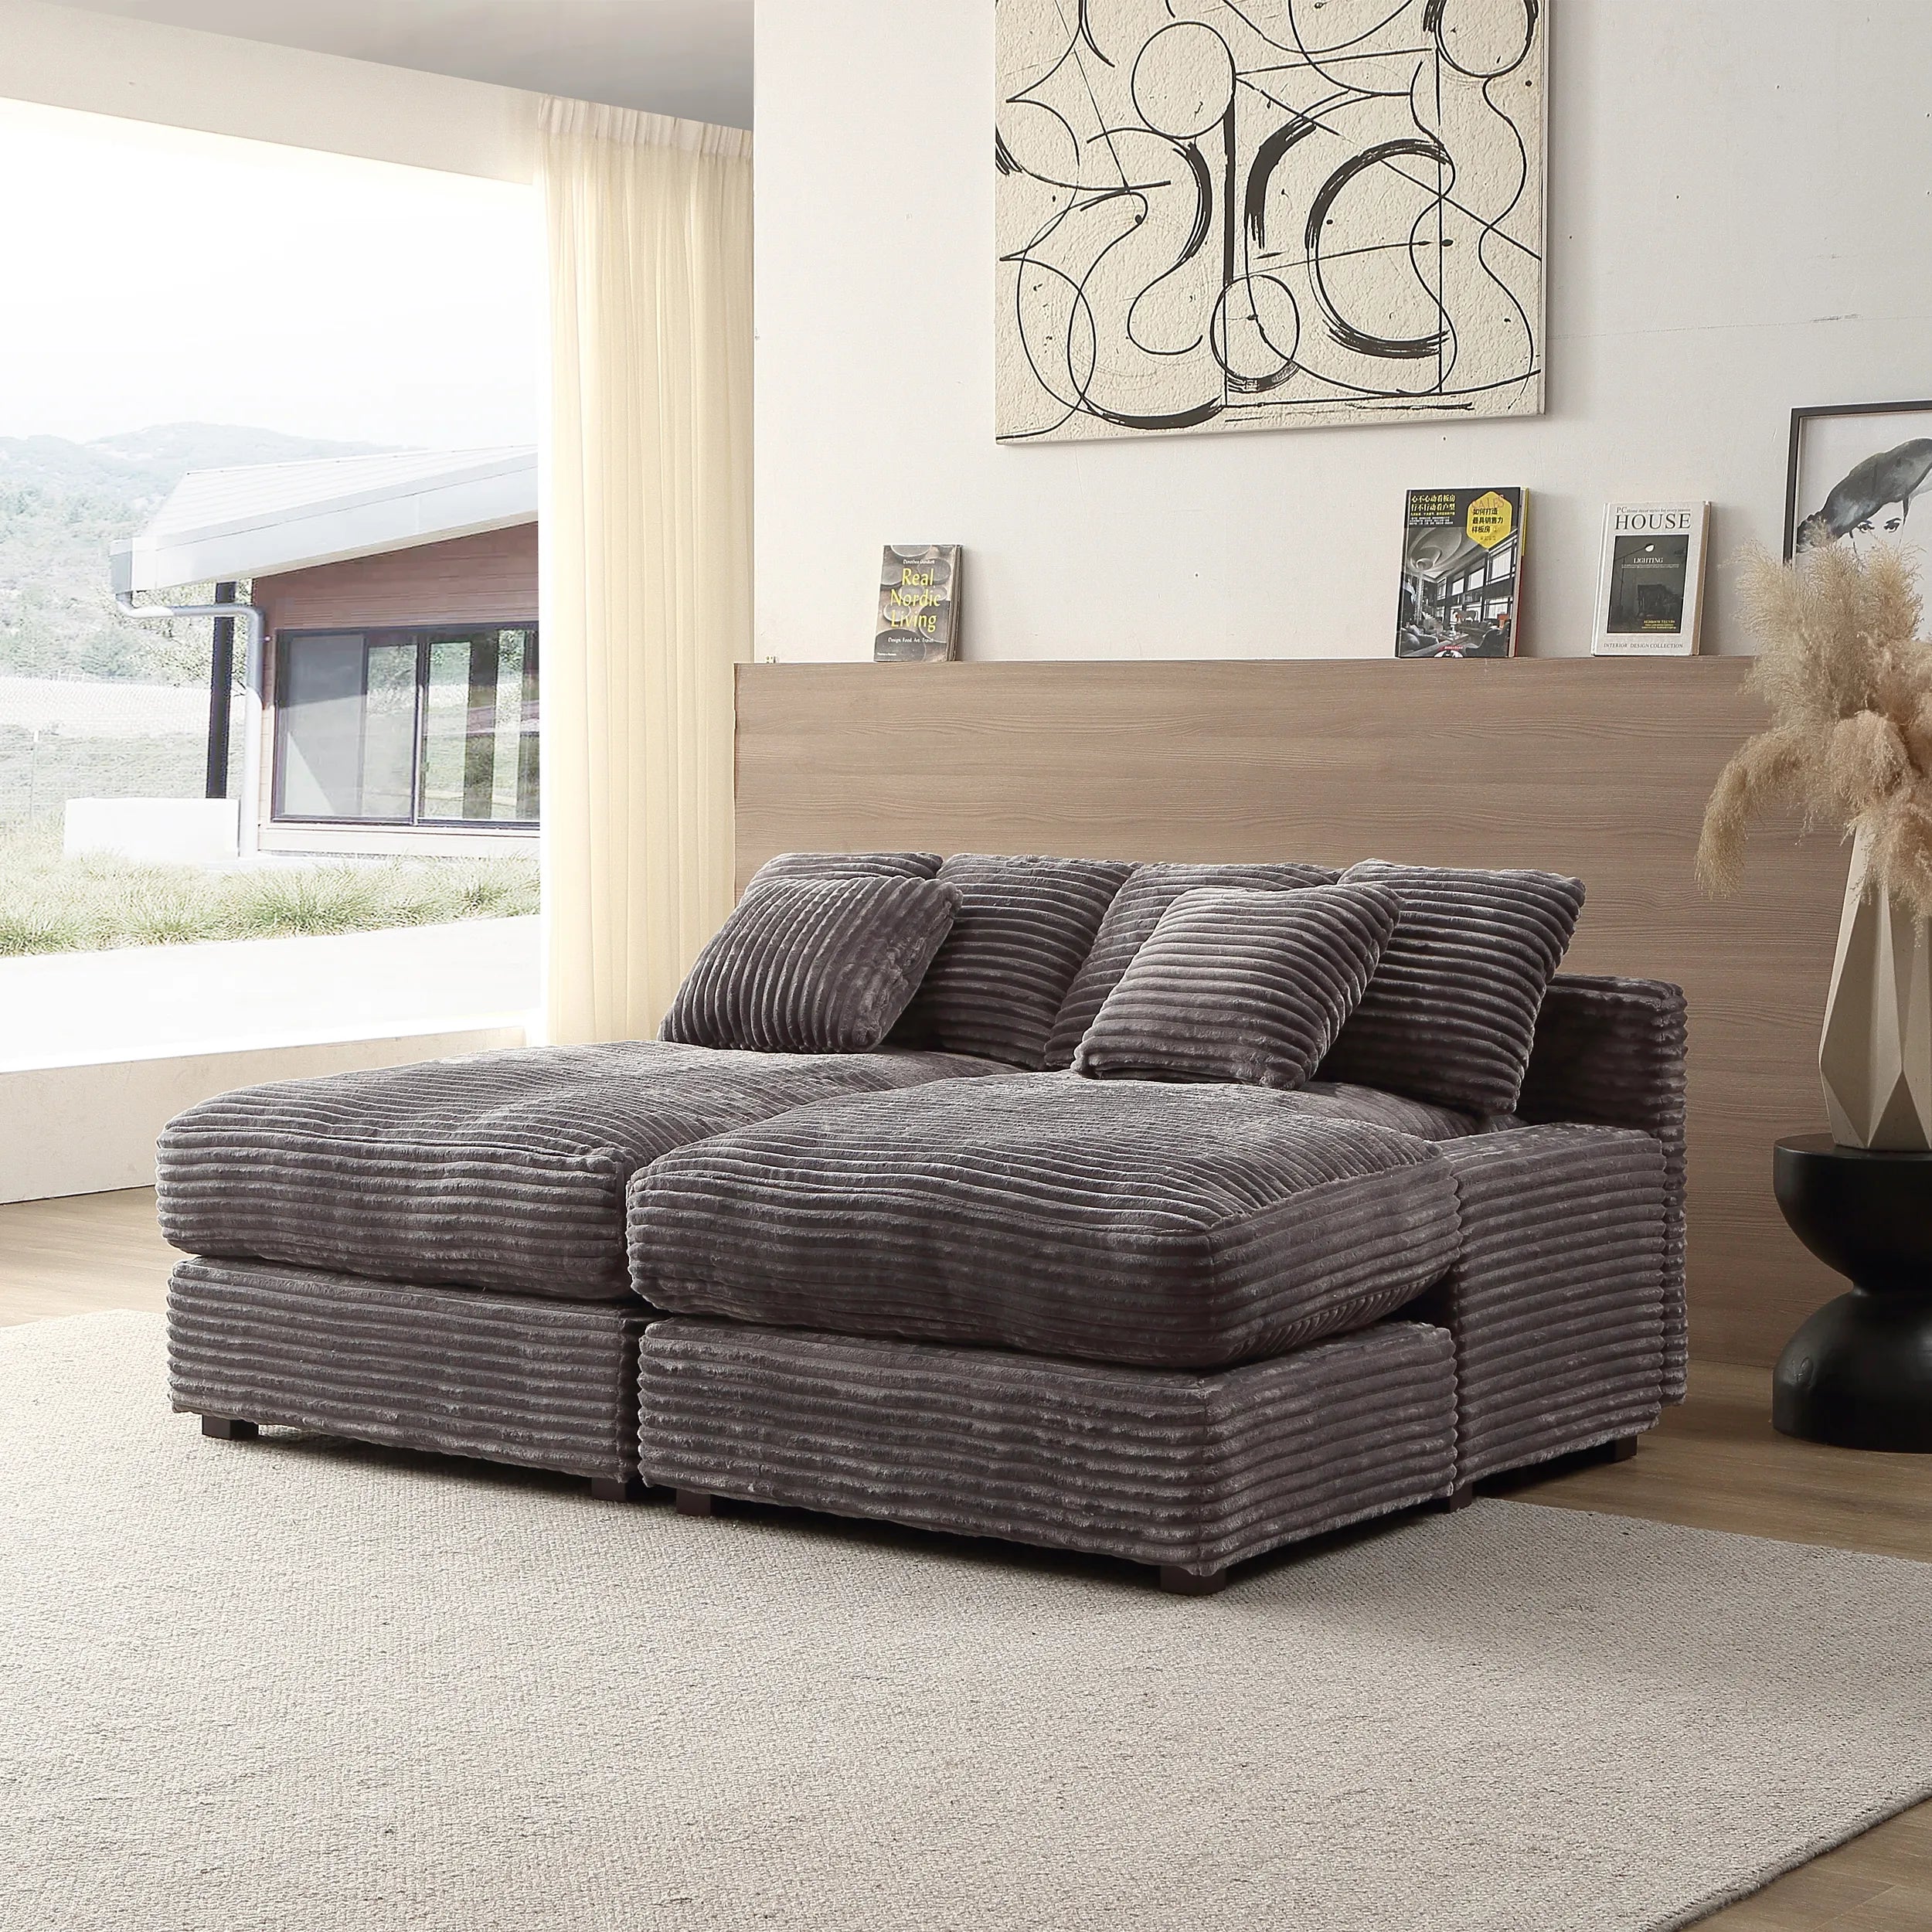 Louie Corduroy Sectional Sofa, Deep Seat Double Chaise Couch - Gray